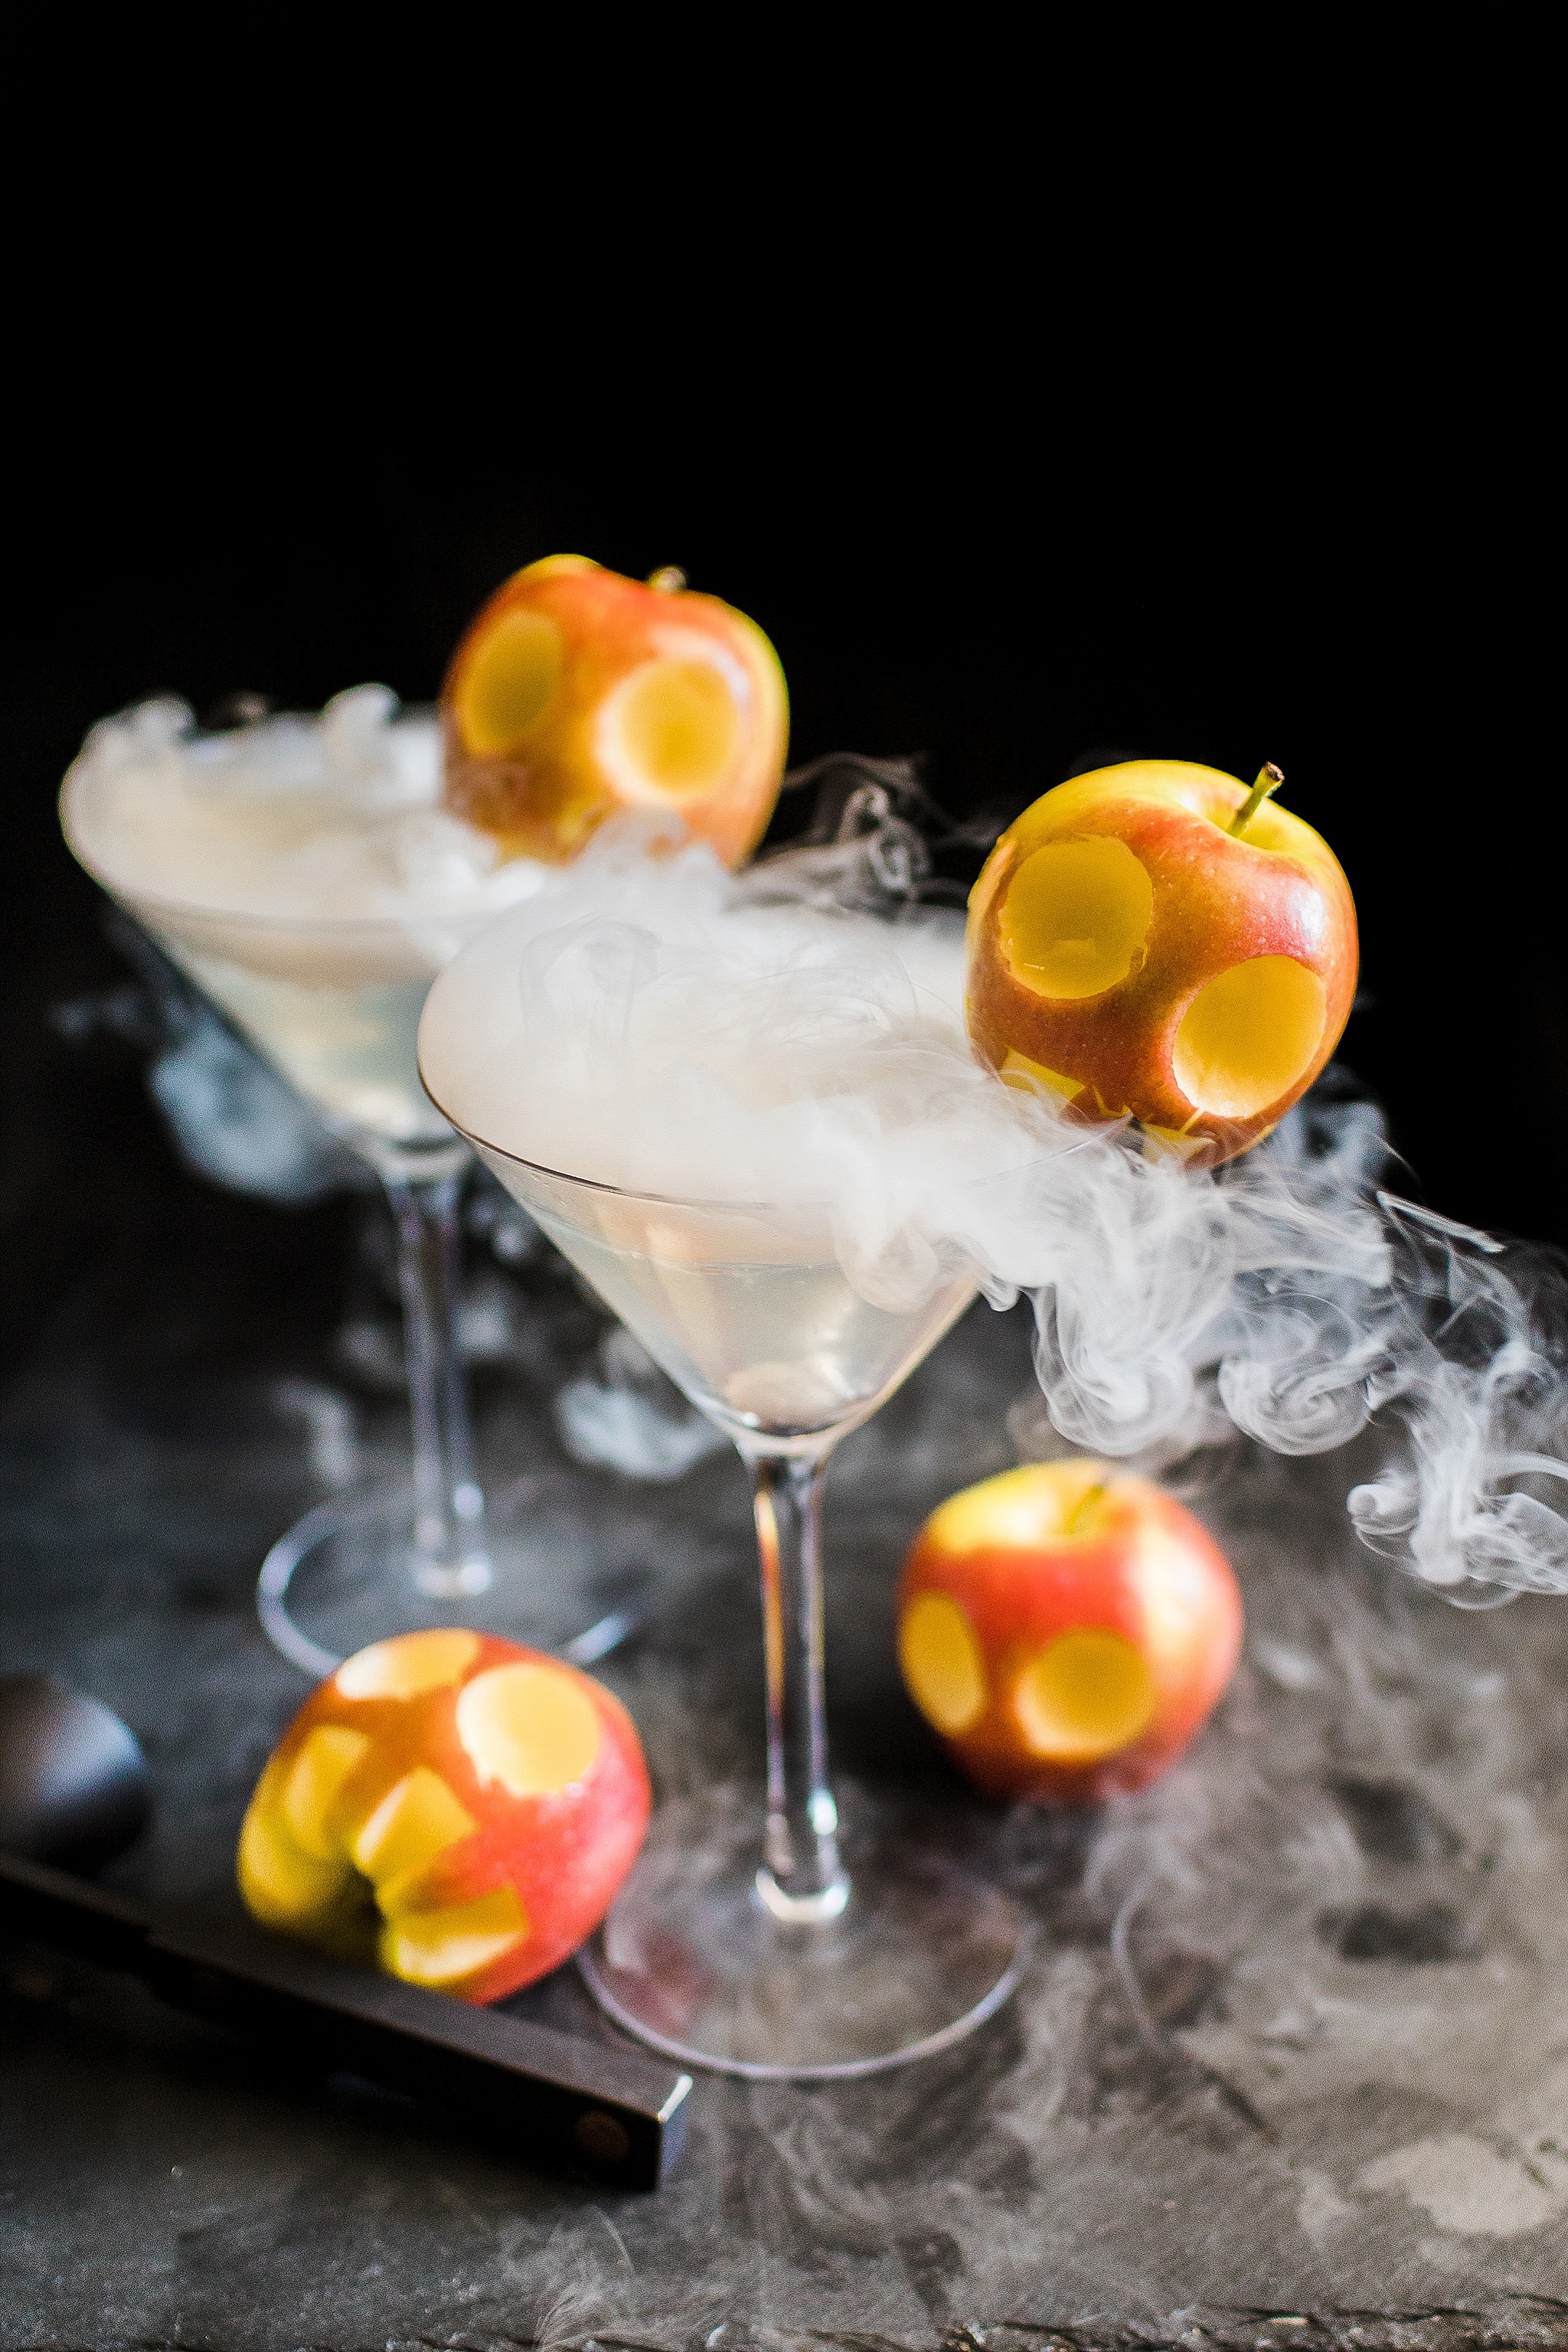 How to Safely Use Dry Ice in Drinks - The Rose Table